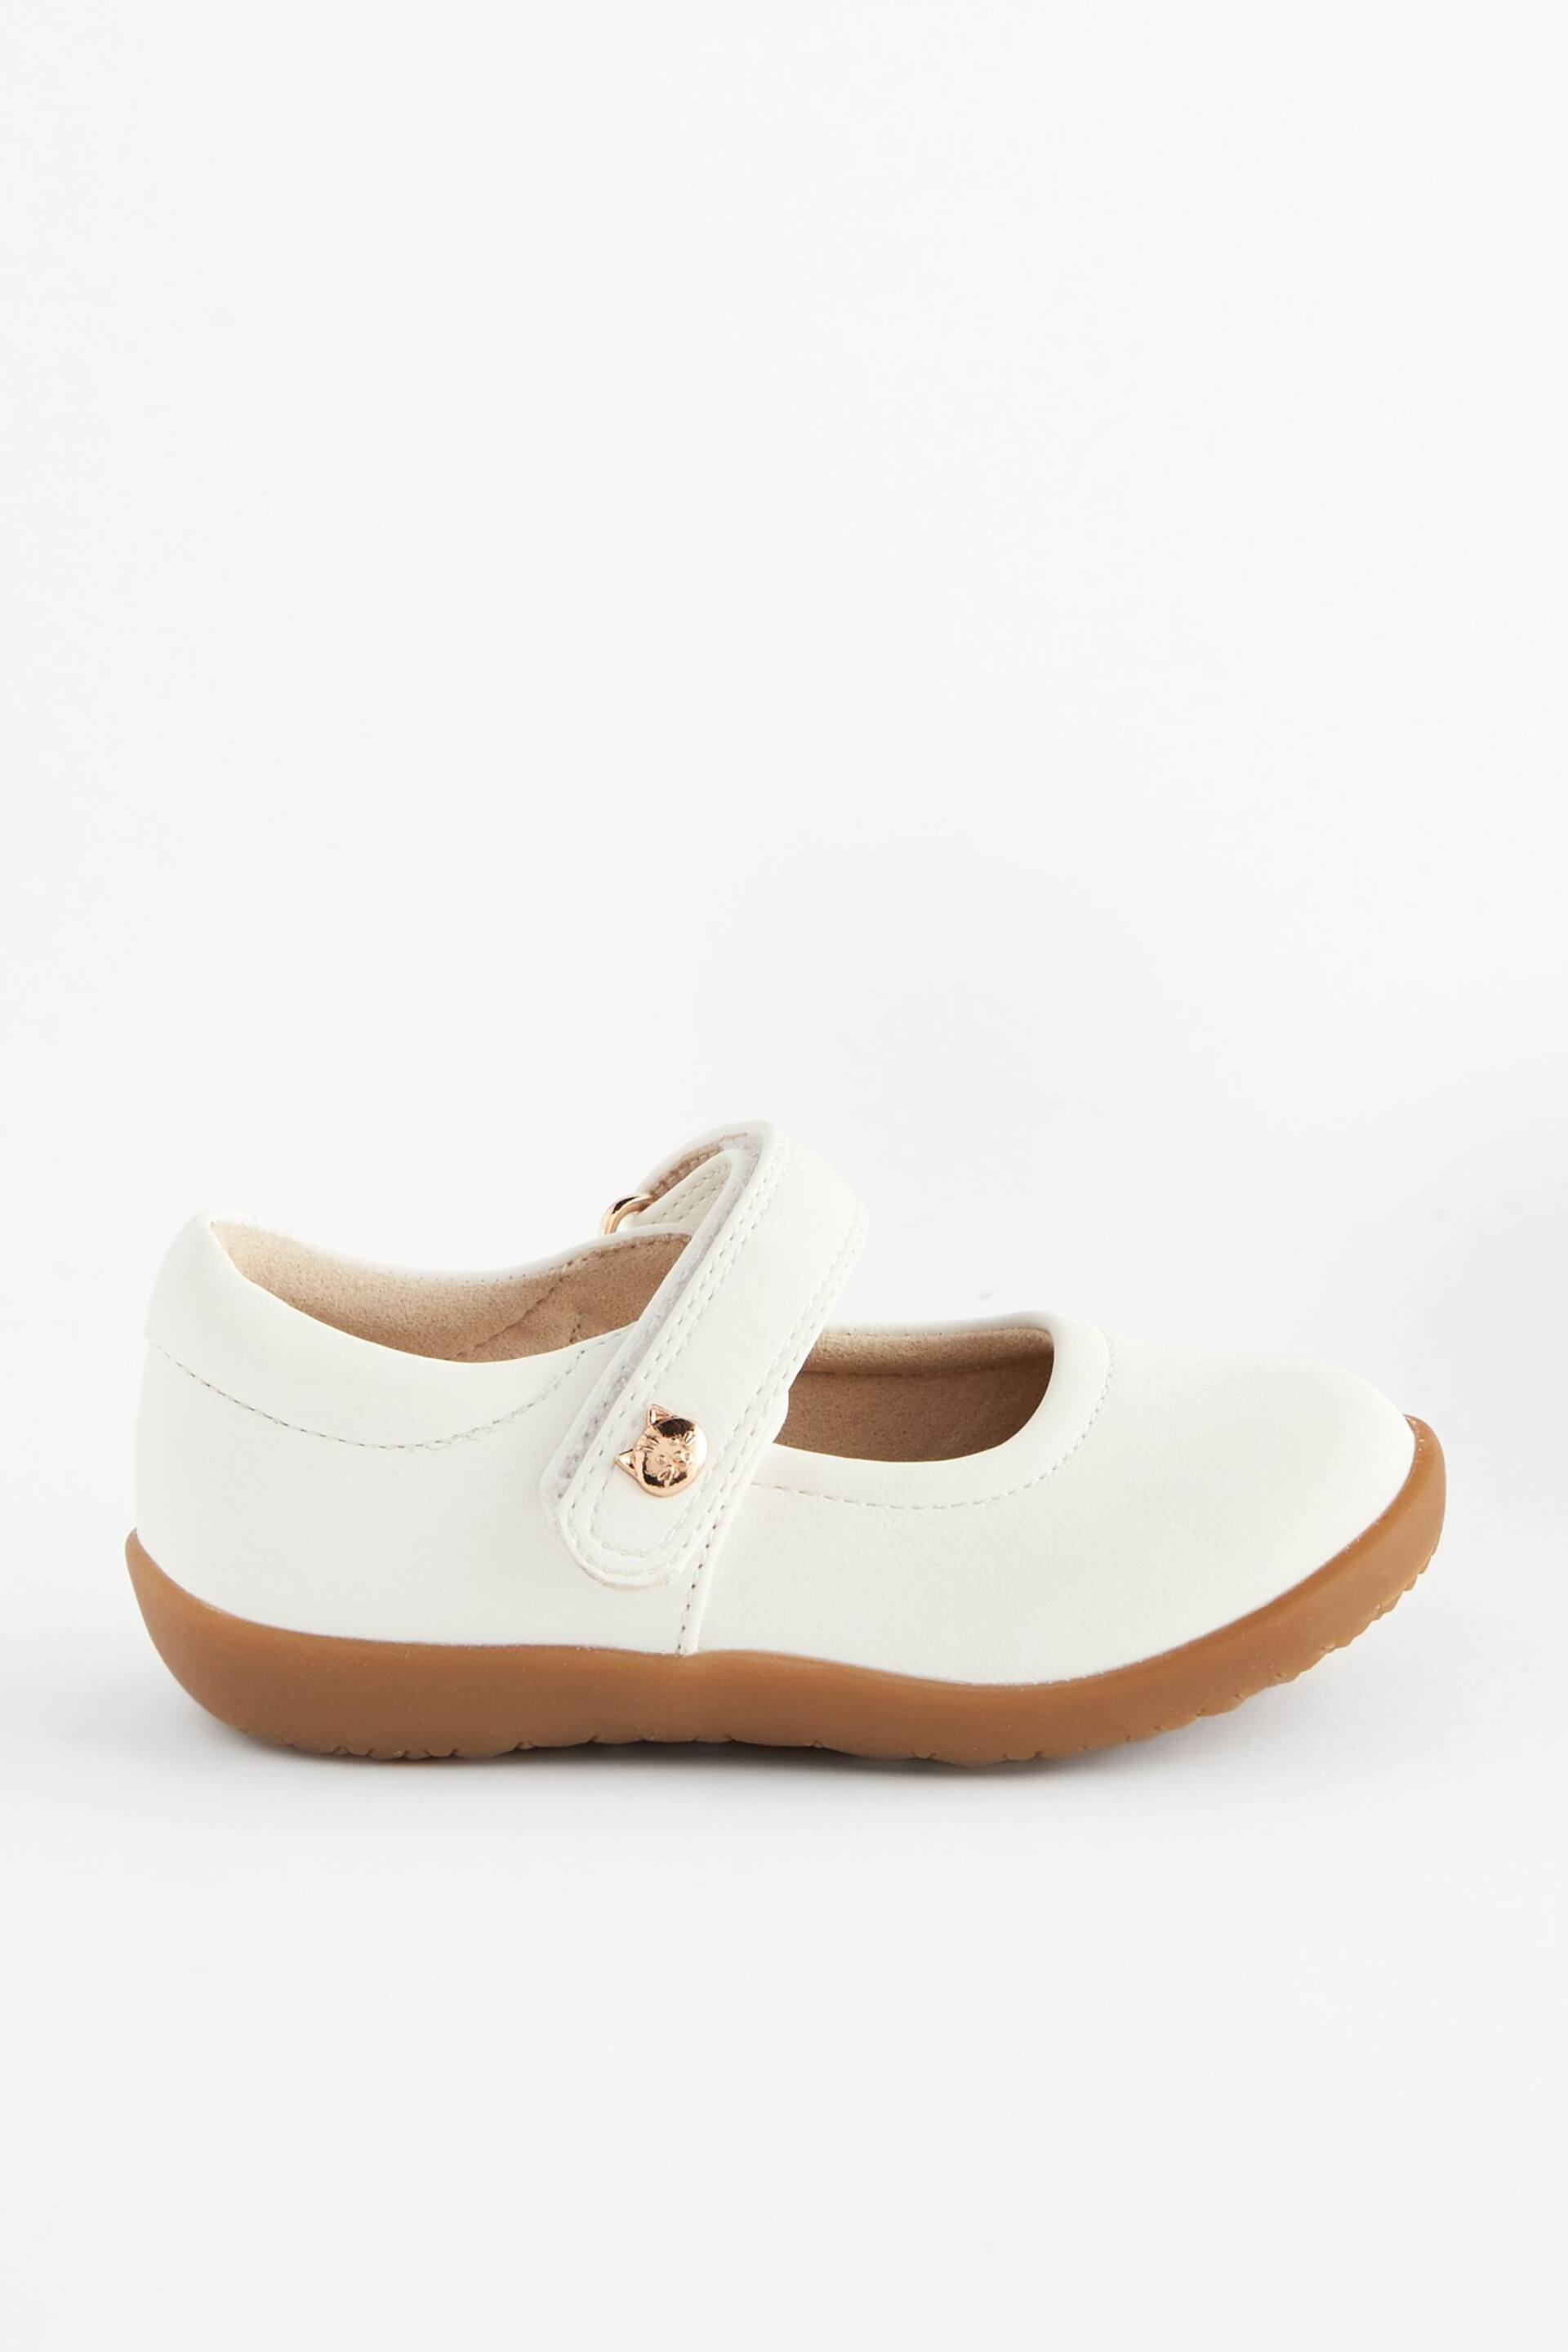 White Standard Fit (F) First Walker Mary Jane Shoes - Image 2 of 5